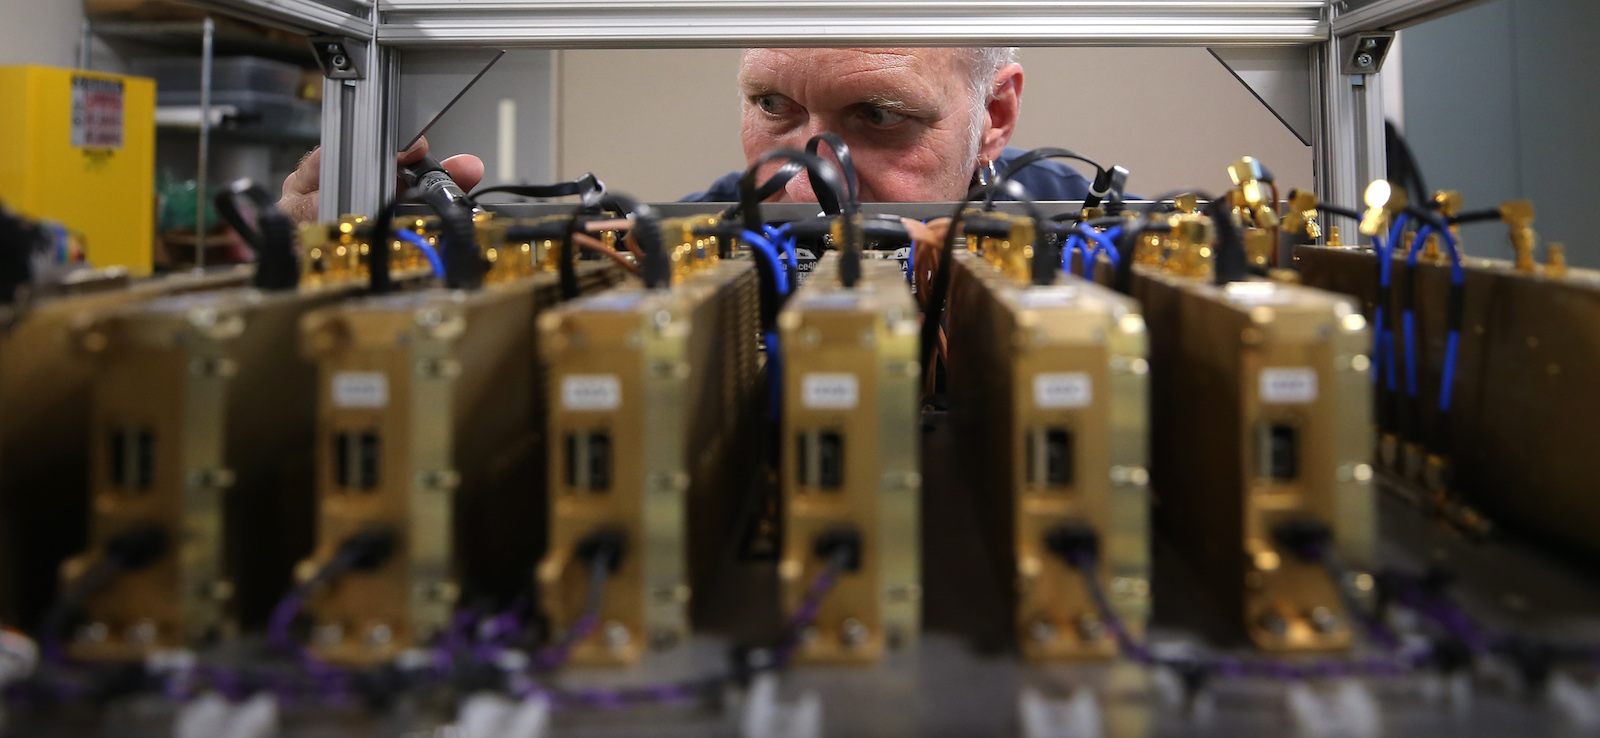 a man's eyes are visible peeking over rows of electrical equipment